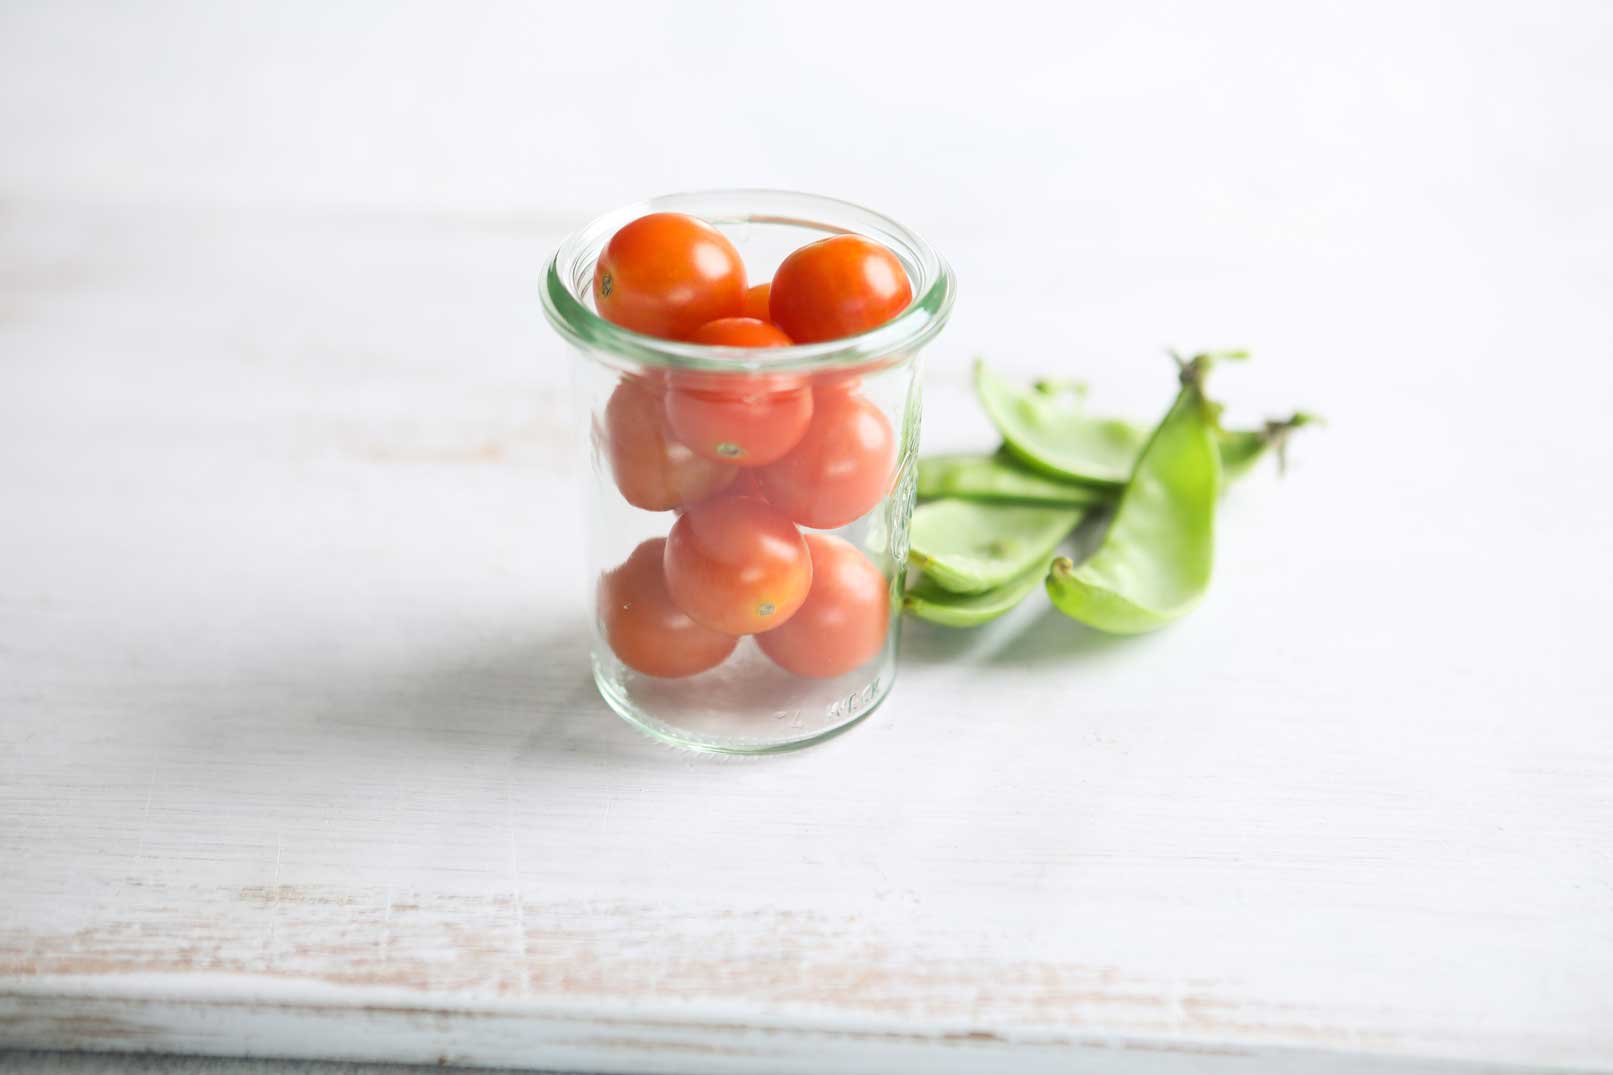 Cherry tomatoes in a glass jar with a handful of snow peas on the side